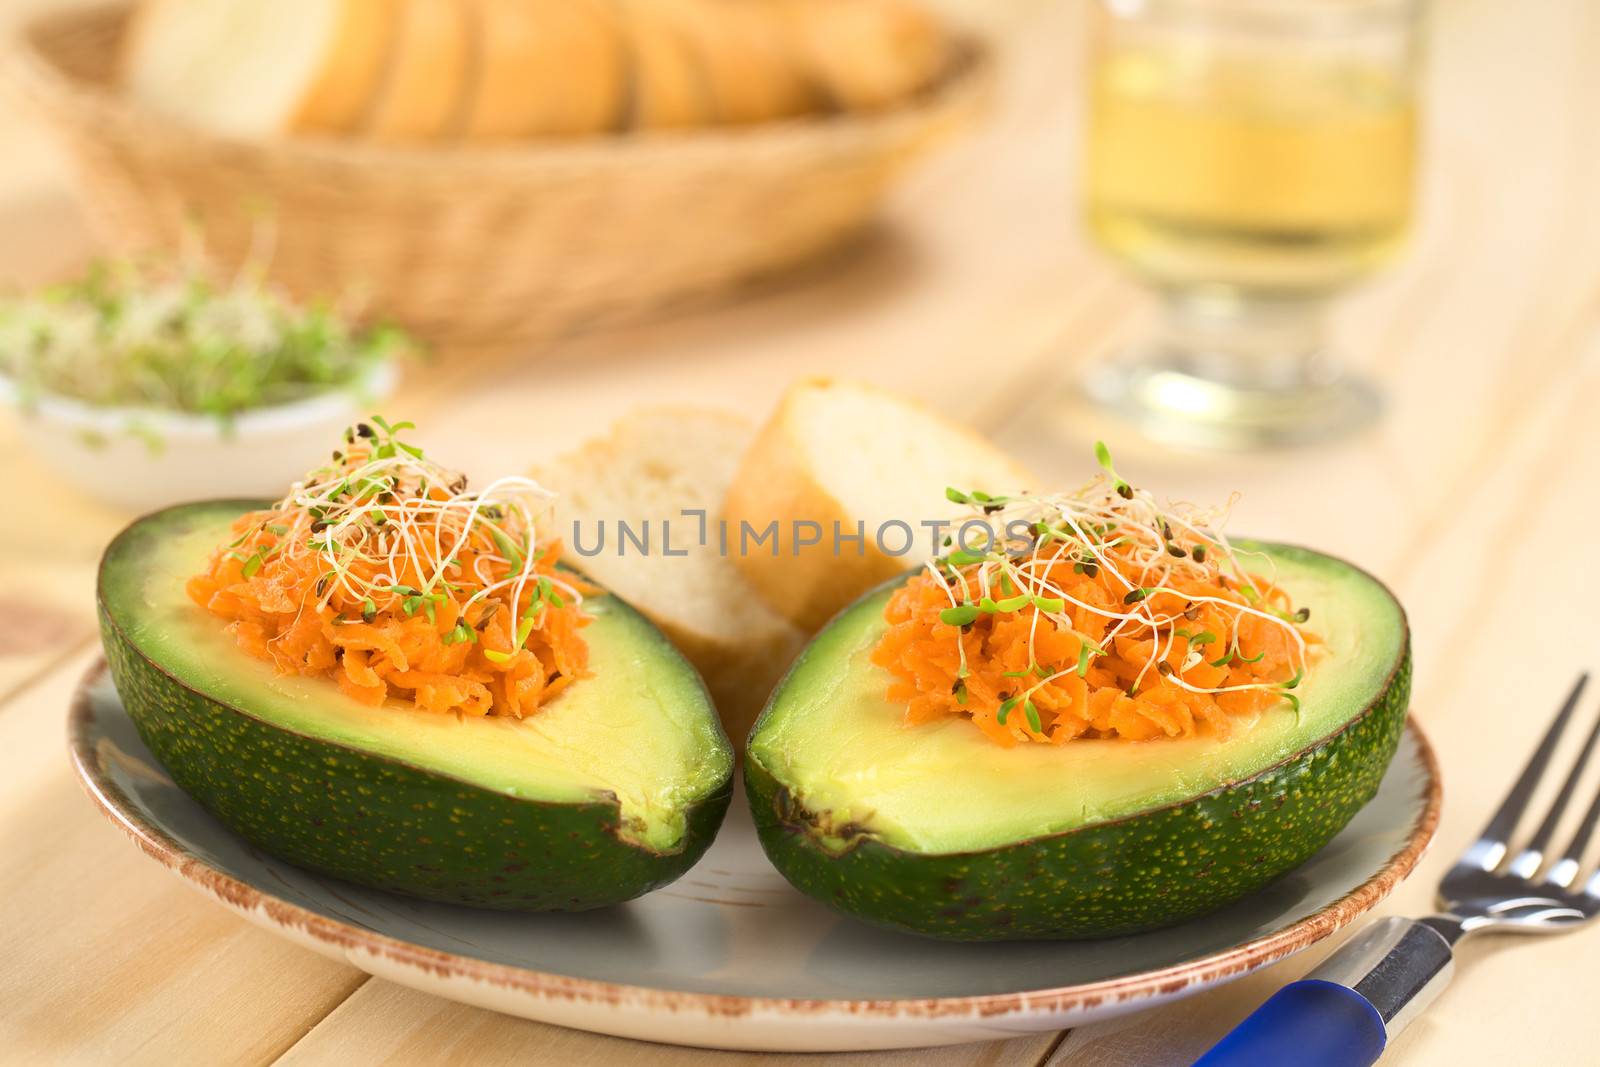 Avocado with Carrots and Sprouts by ildi